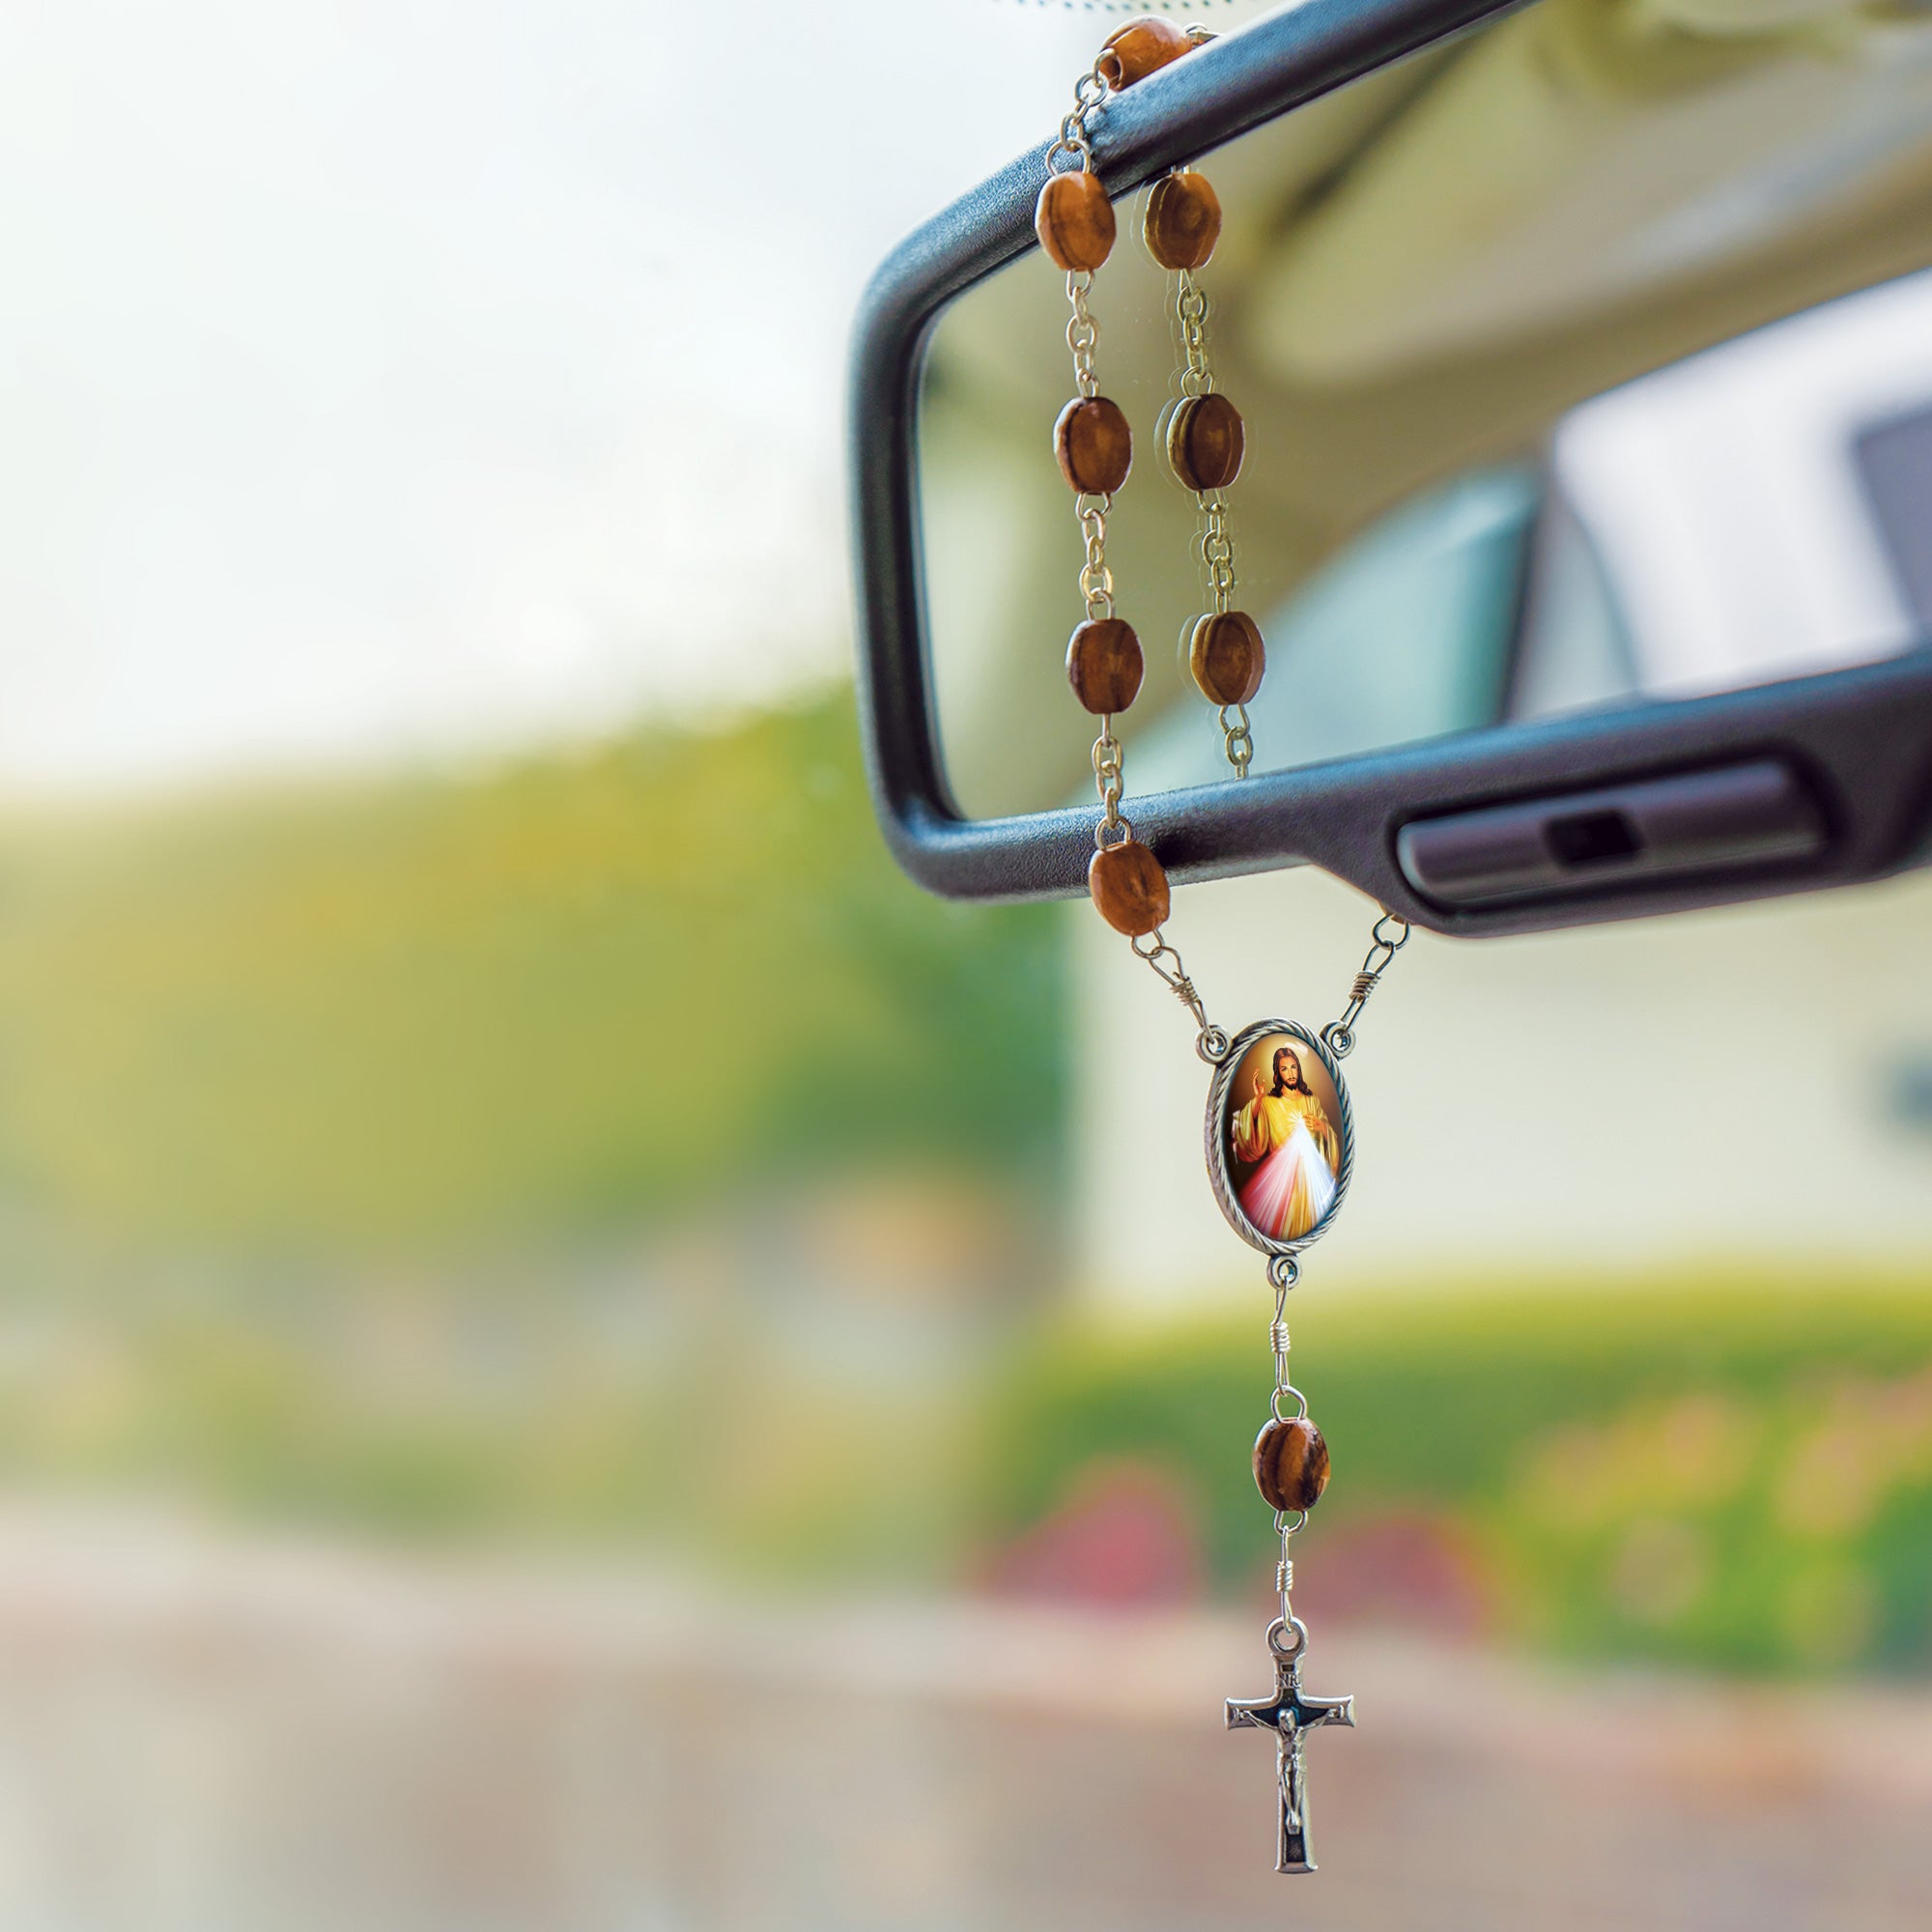 Jesus Divine Mercy, Holy Land Olive Wood Pocket Auto Rosary, Made in Bethlehem on rearview mirror